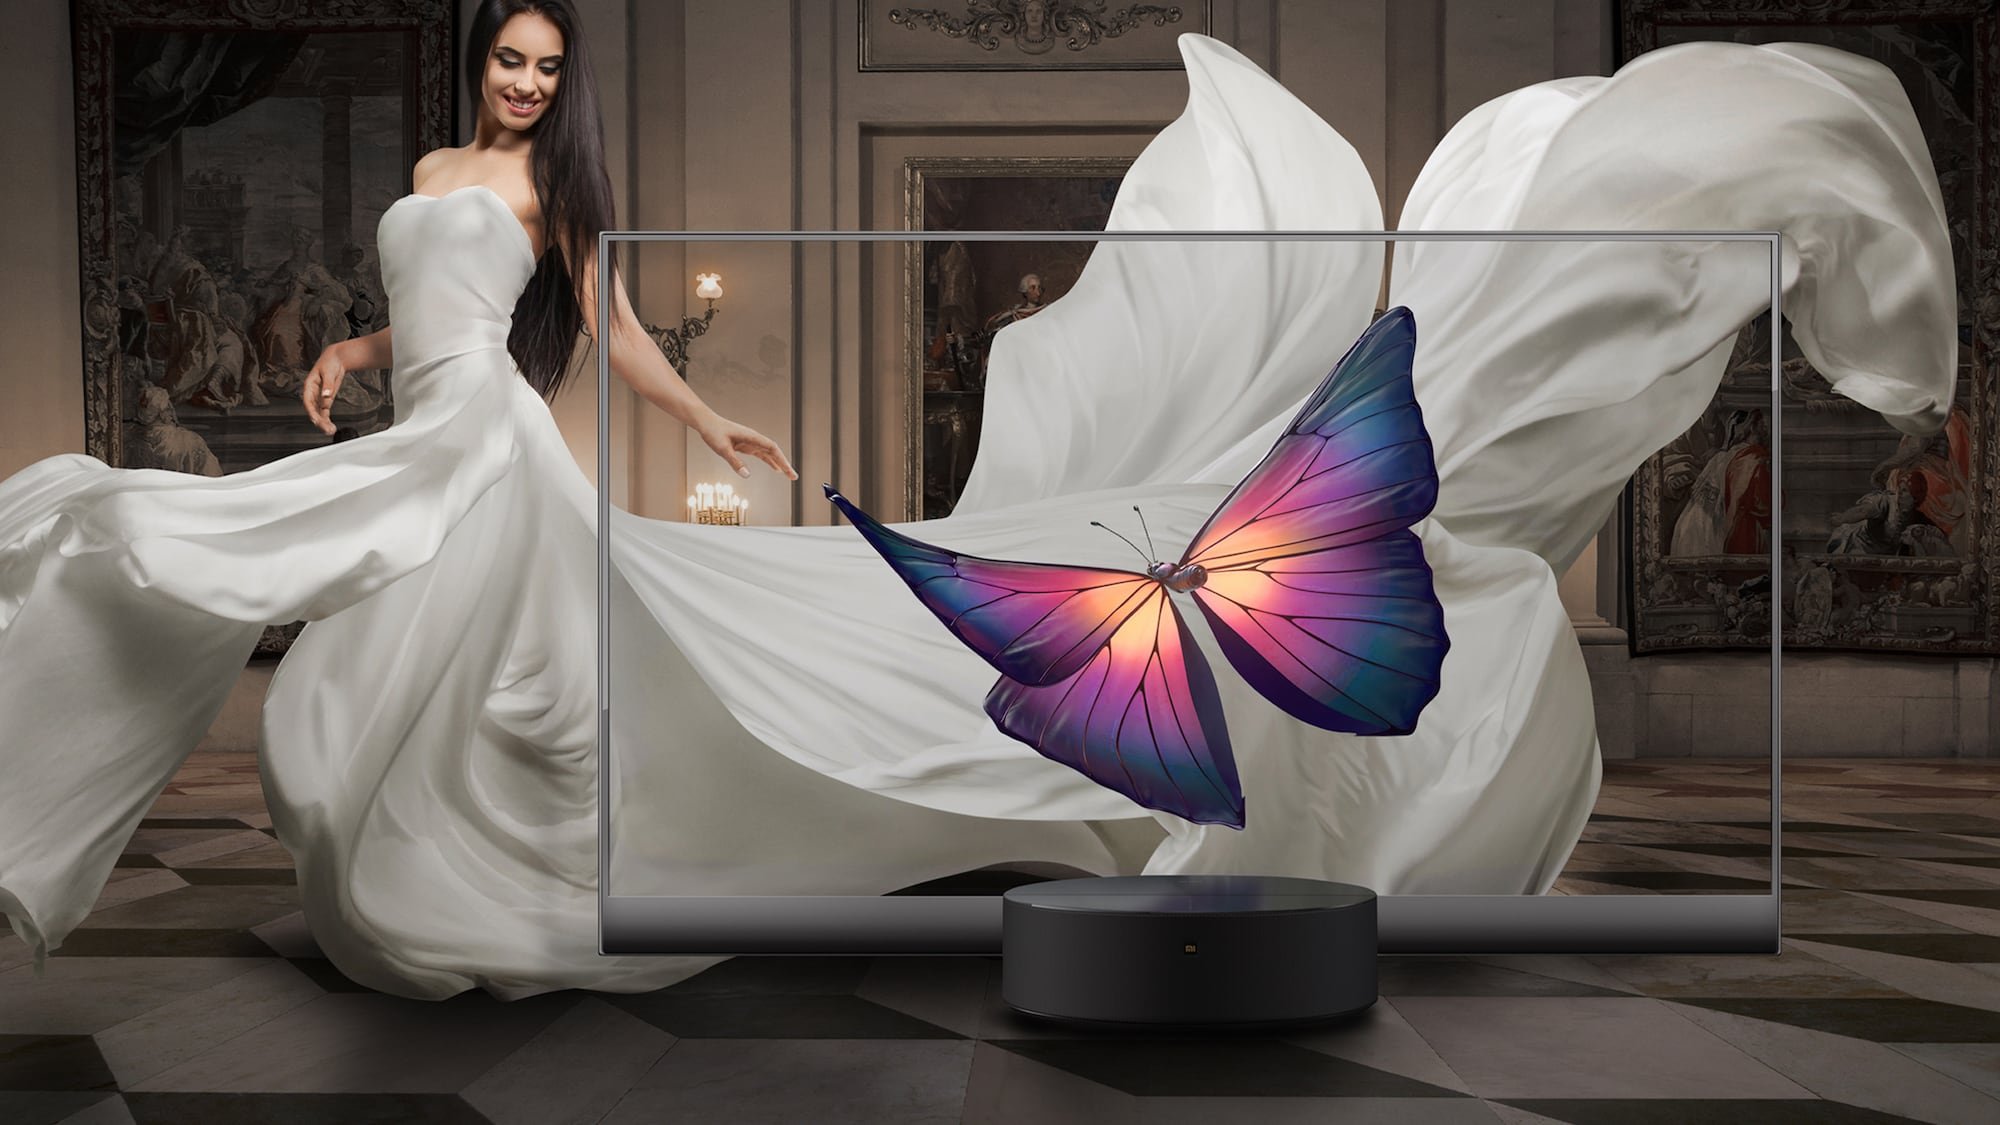 Xiaomi Mi TV LUX OLED Transparent Edition clear TV has an edge-to-edge display